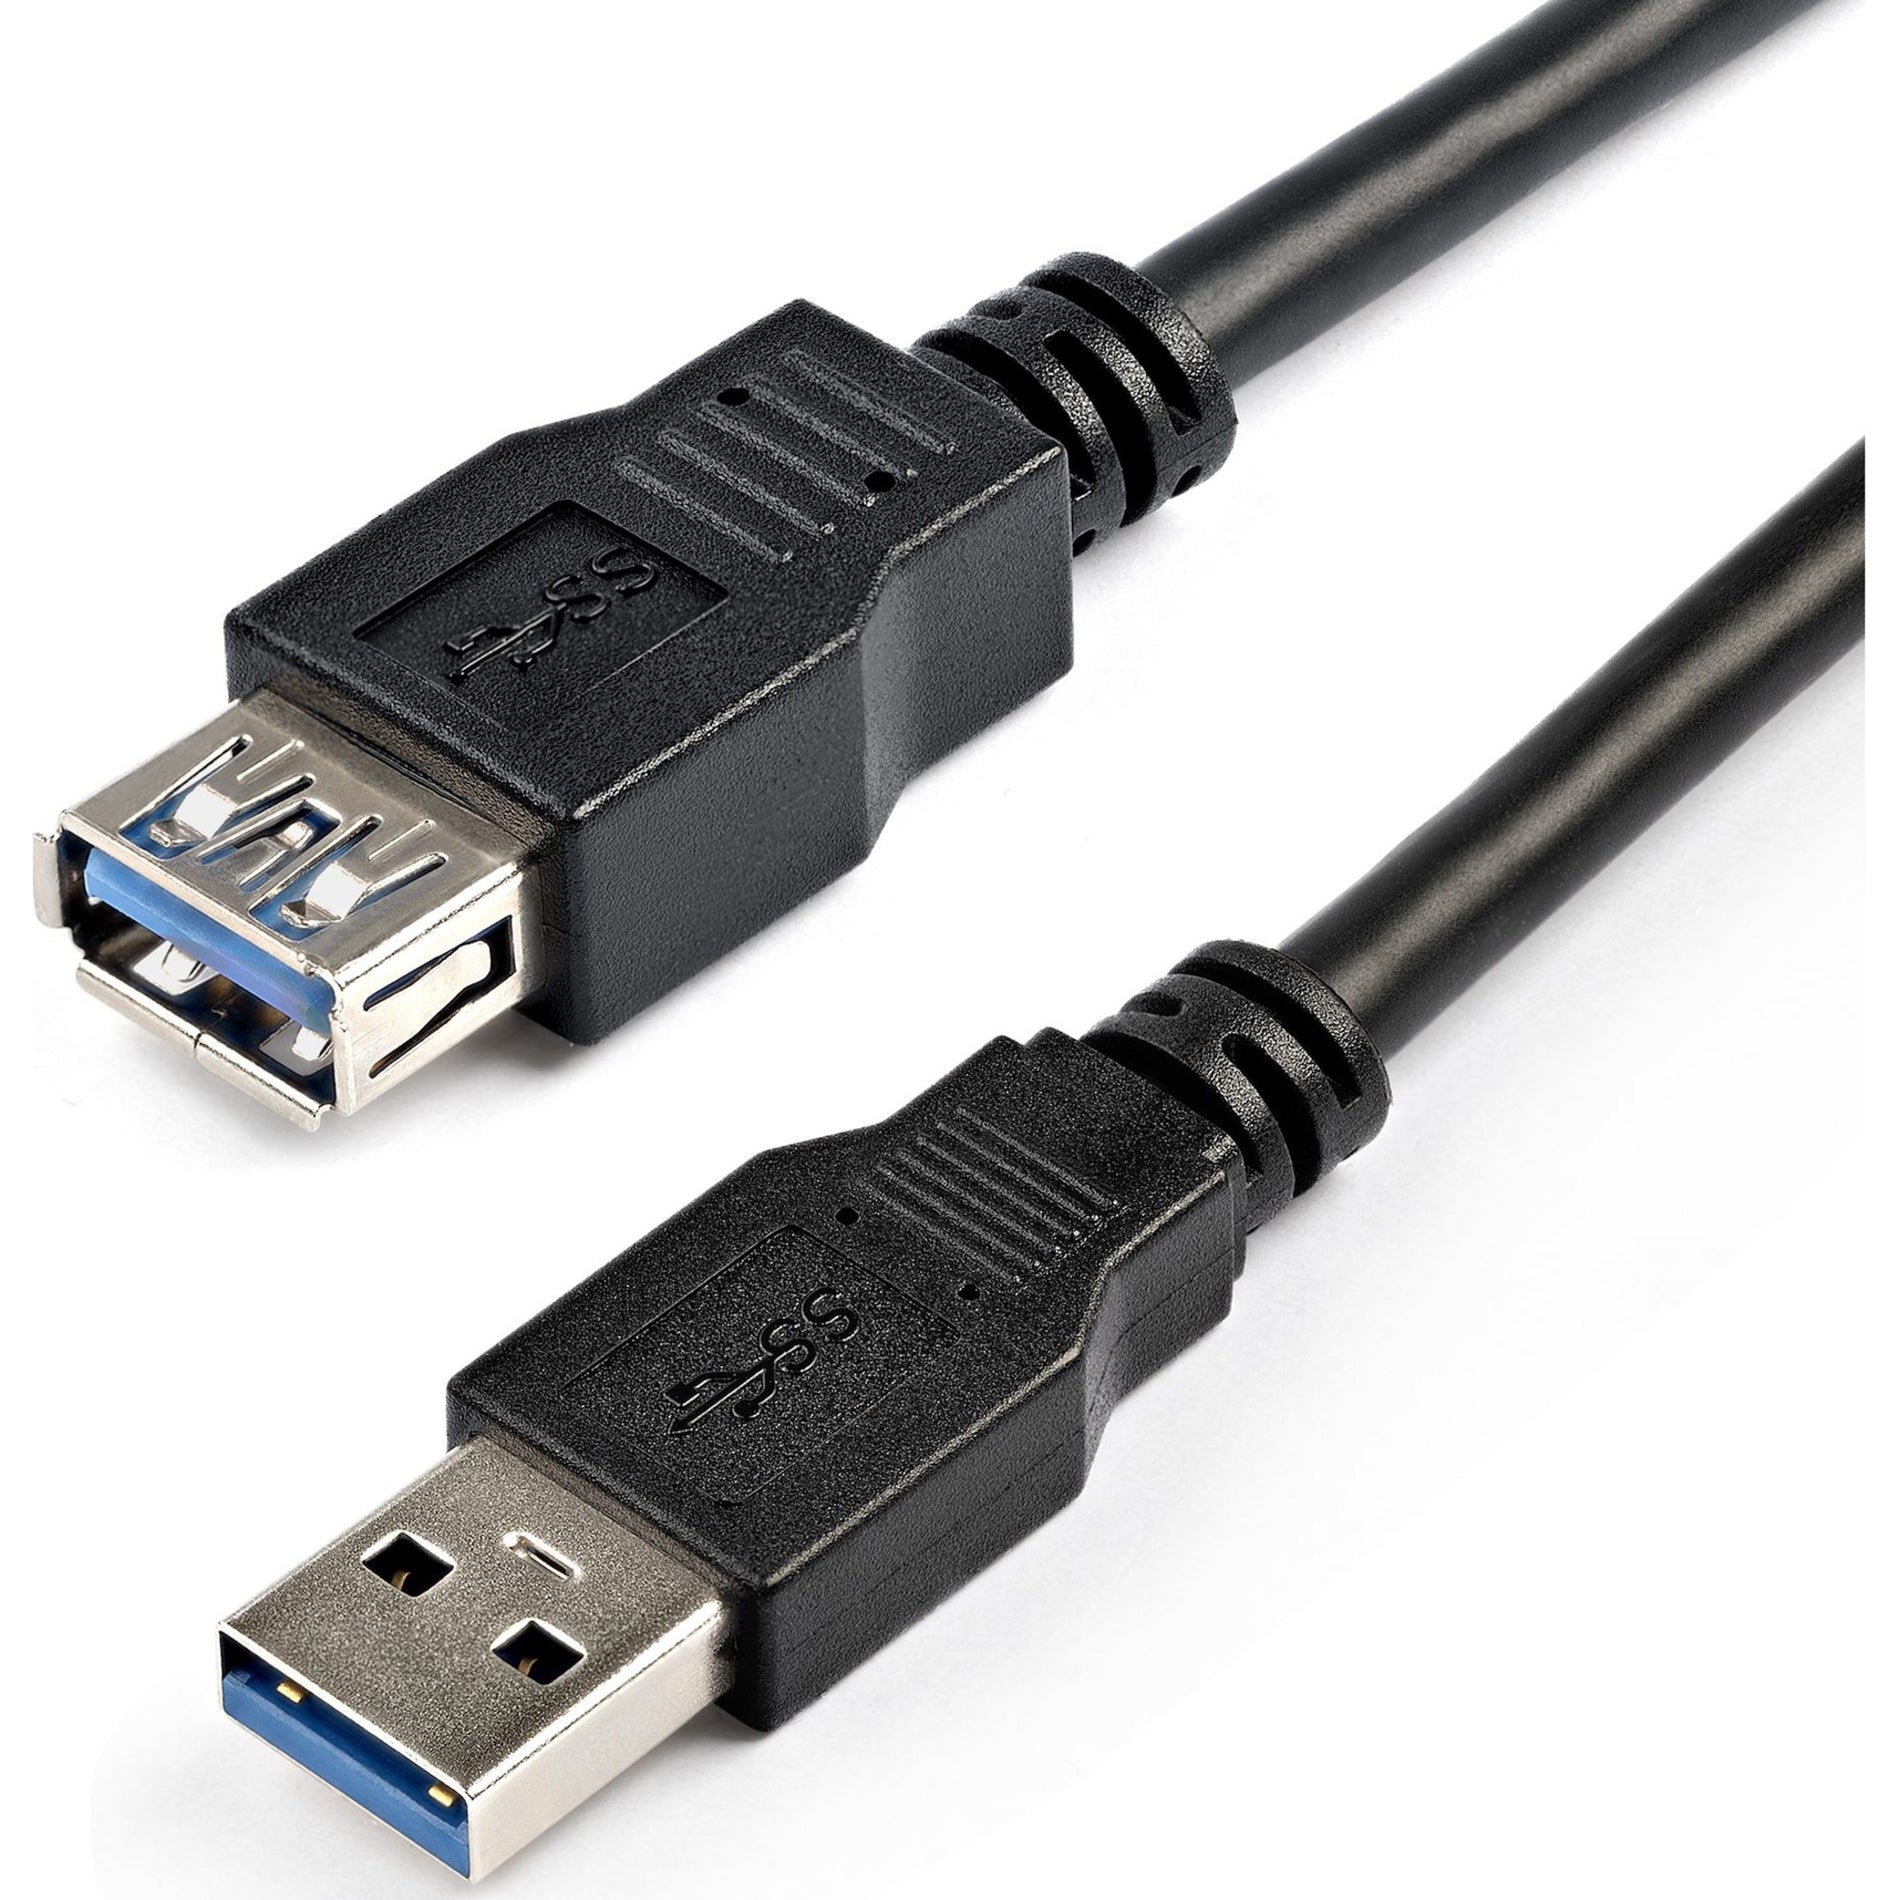 StarTech.com USB3SEXT2MBK 2m Black SuperSpeed USB 3.0 Extension Cable A to A - M/F, EMI Protection, 5 Gbit/s Data Transfer Rate